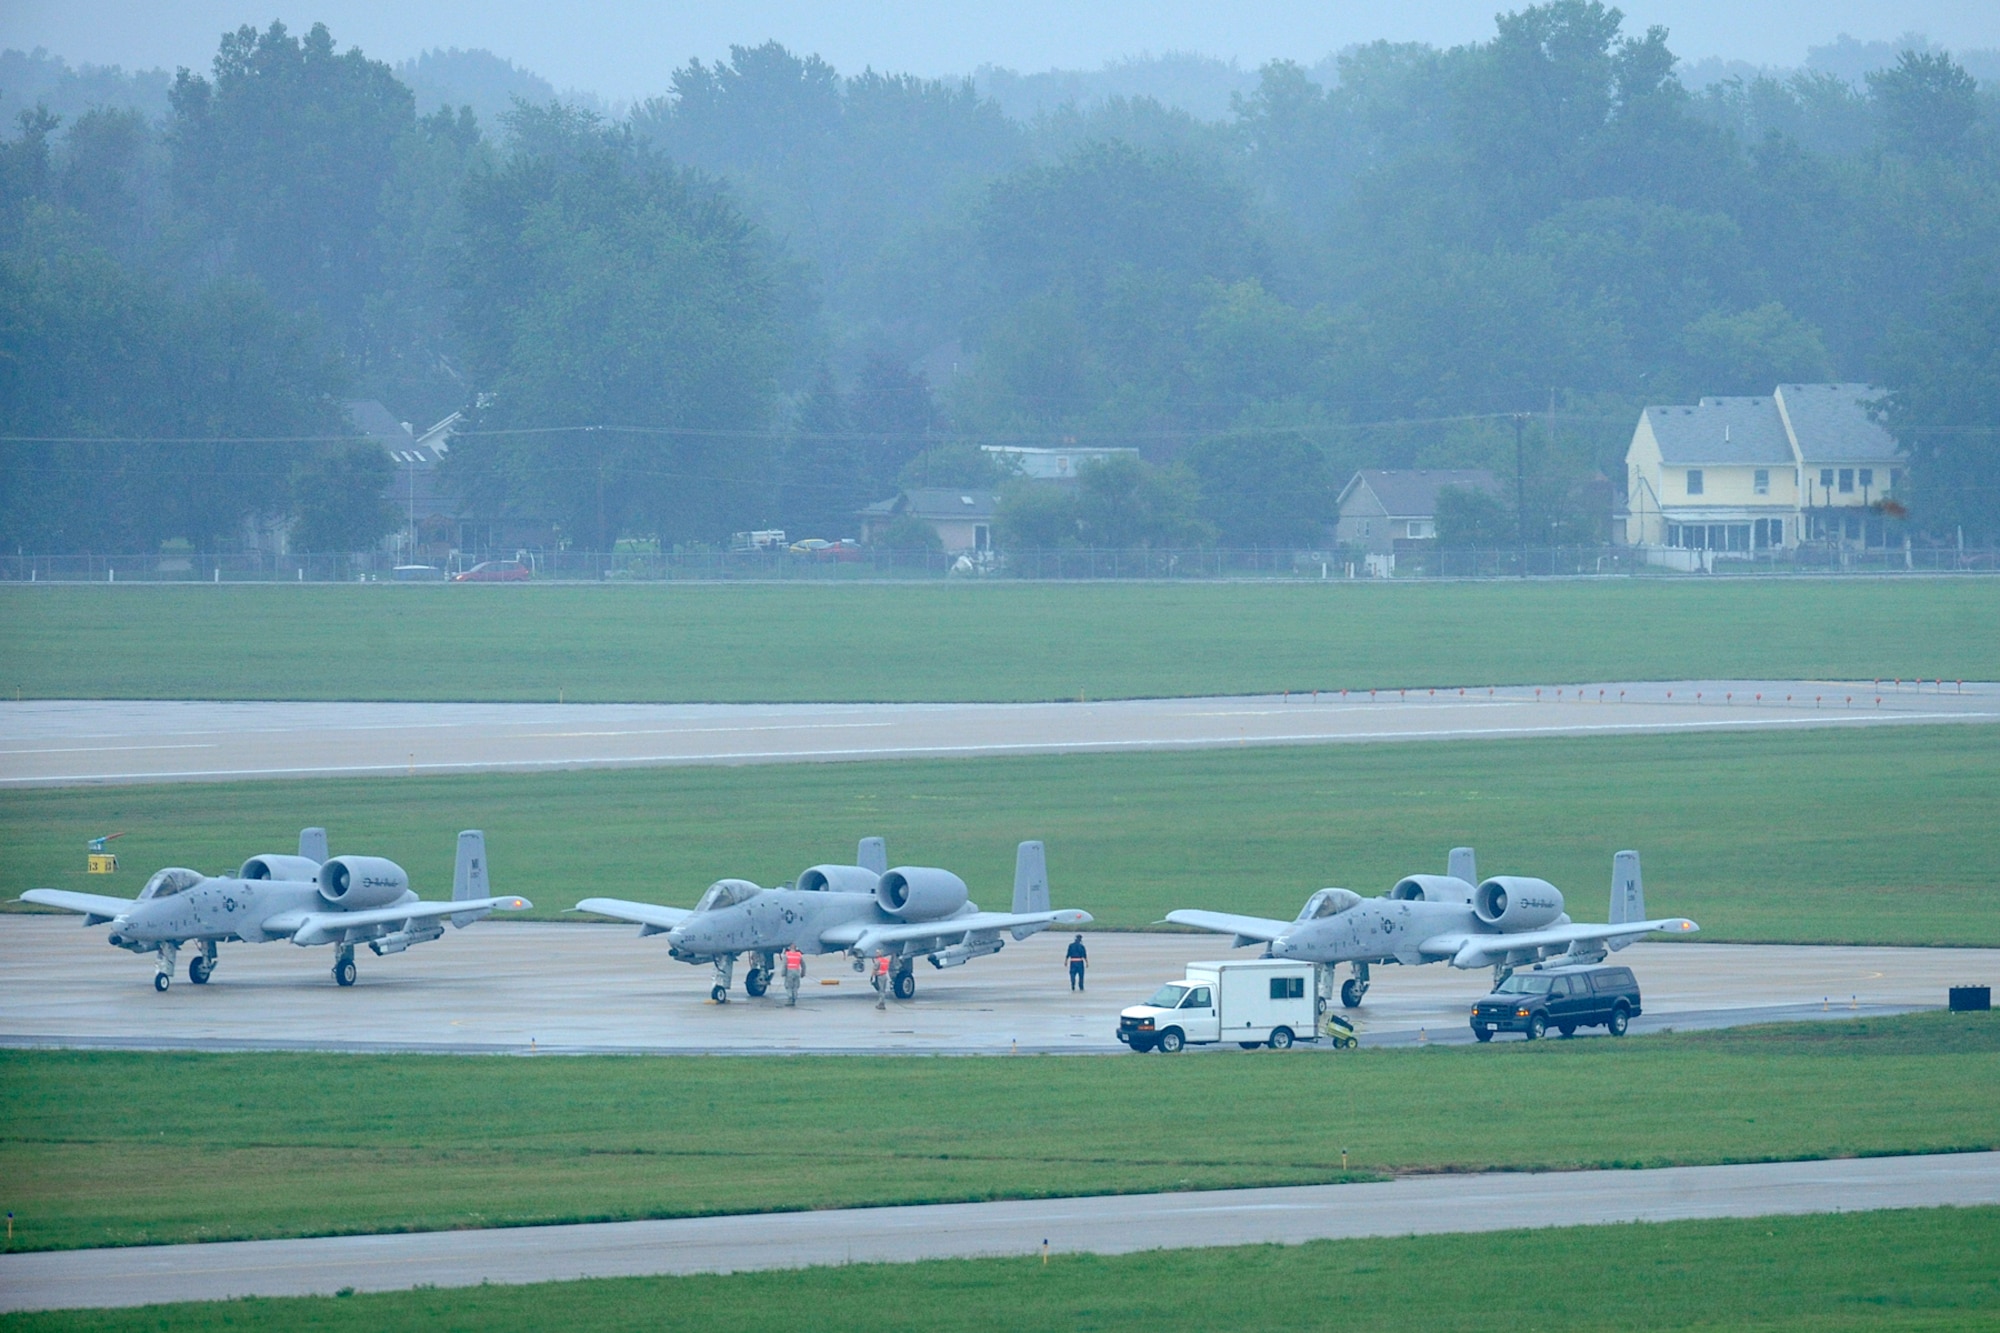 Ground crew personnel perform the final maintenance checks and adjustments as three A-10 Thunderbolt II aircraft wait at the “last chance” holding area just prior to take off in an early morning rain at Selfridge Air National Guard Base, Mich., Aug. 10, 2012. Airmen from the 107th Fighter Squadron, who fly the aircraft, and the 127th Maintenance Group, who maintain the aircraft, participated in a surge operation, launching and recovering a higher-than-usual number of aircraft, as part of a series of readiness training exercises taking place at the base in August. (Air National Guard photo by John S. Swanson)